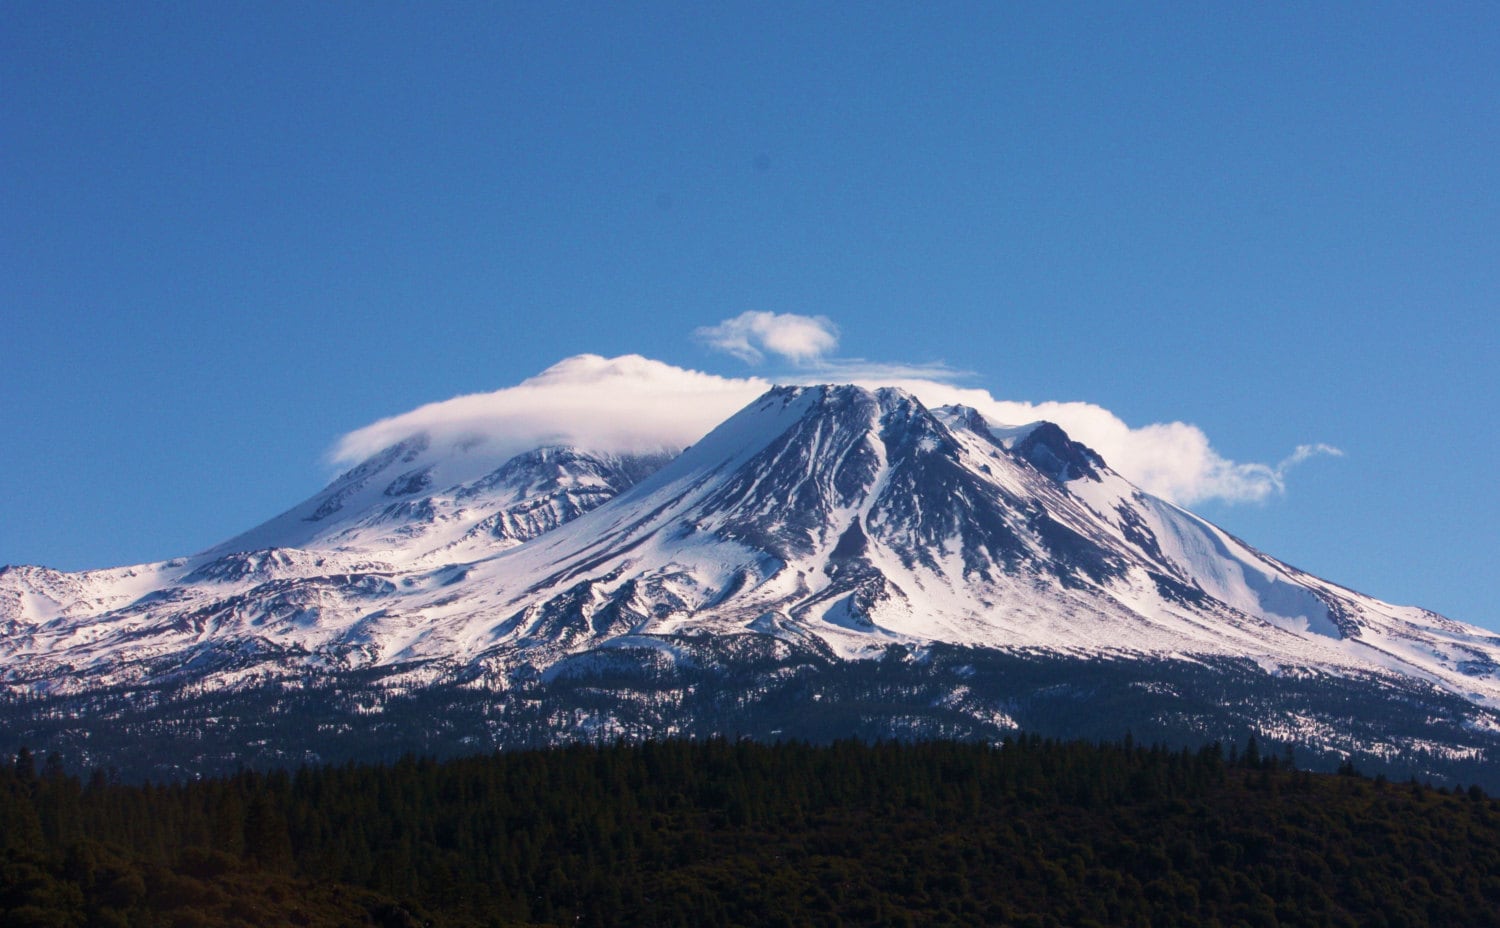 Snow covered Mt. Shasta volcano in Cascade by InspiredShots